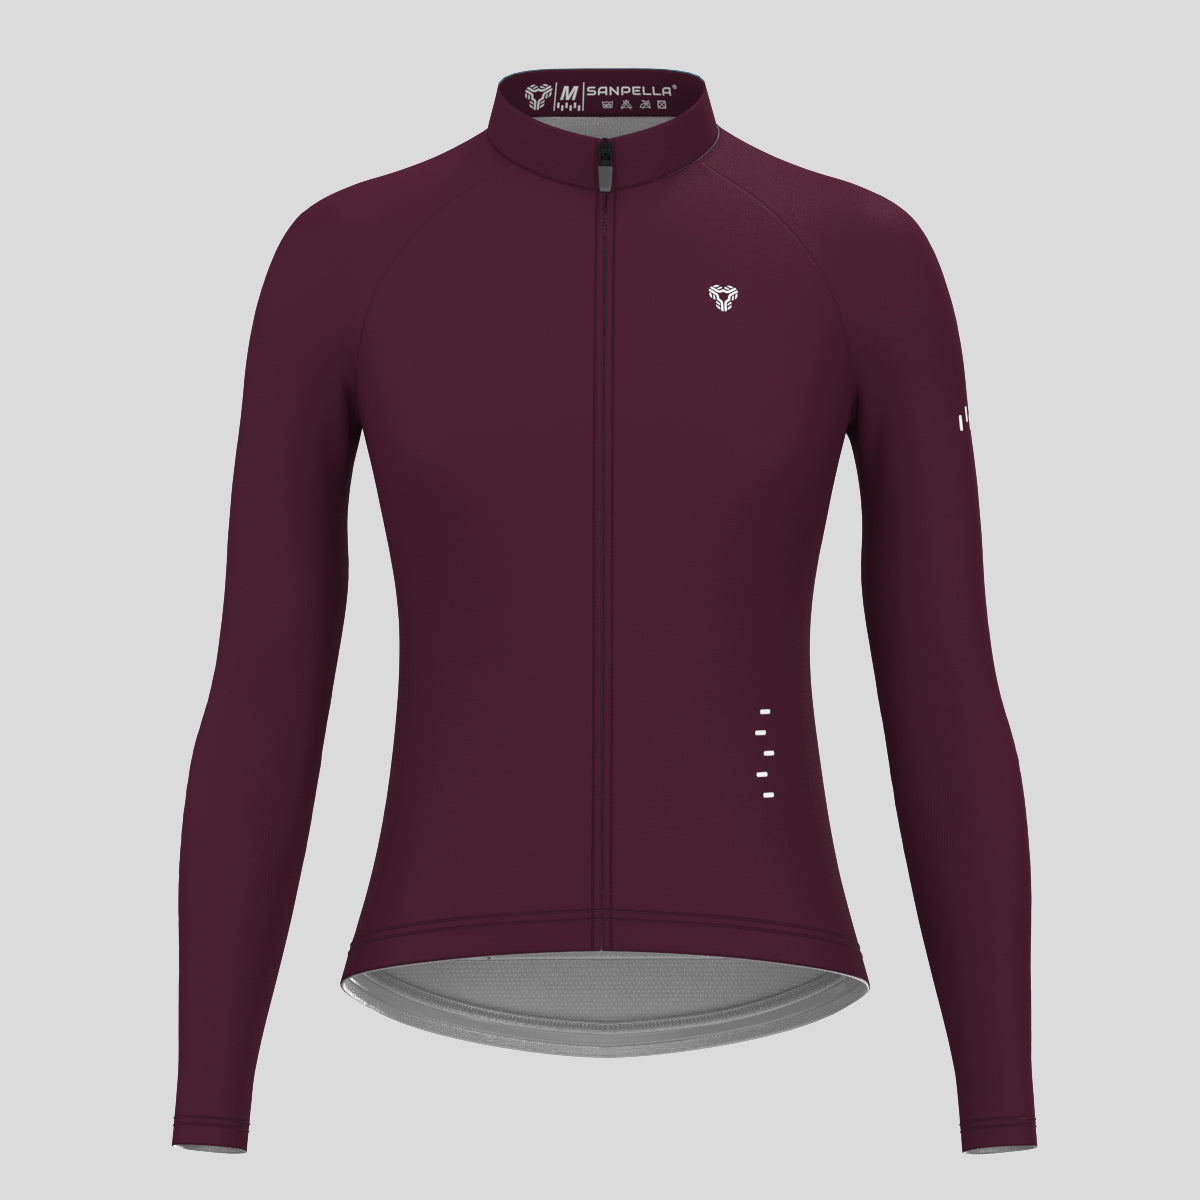 Women's Minimal Solid LS Cycling Jersey - Burgundy